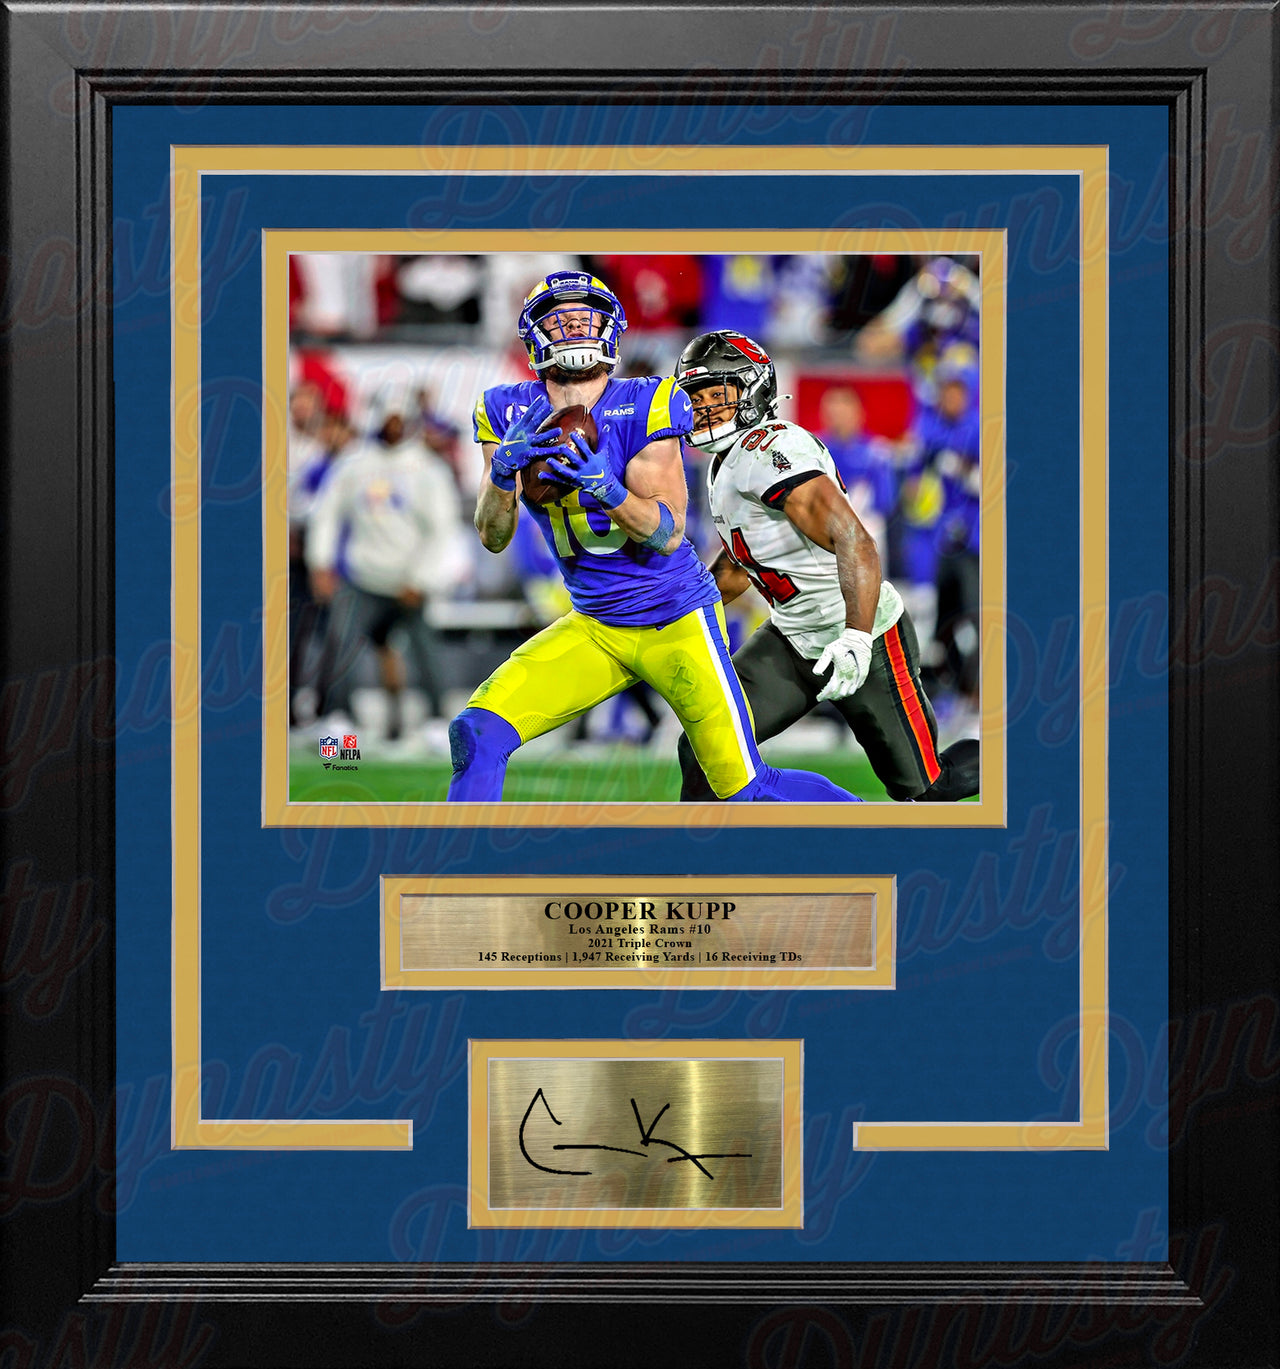 Cooper Kupp Playoff Action Los Angeles Rams 8" x 10" Framed Football Photo with Engraved Autograph - Dynasty Sports & Framing 